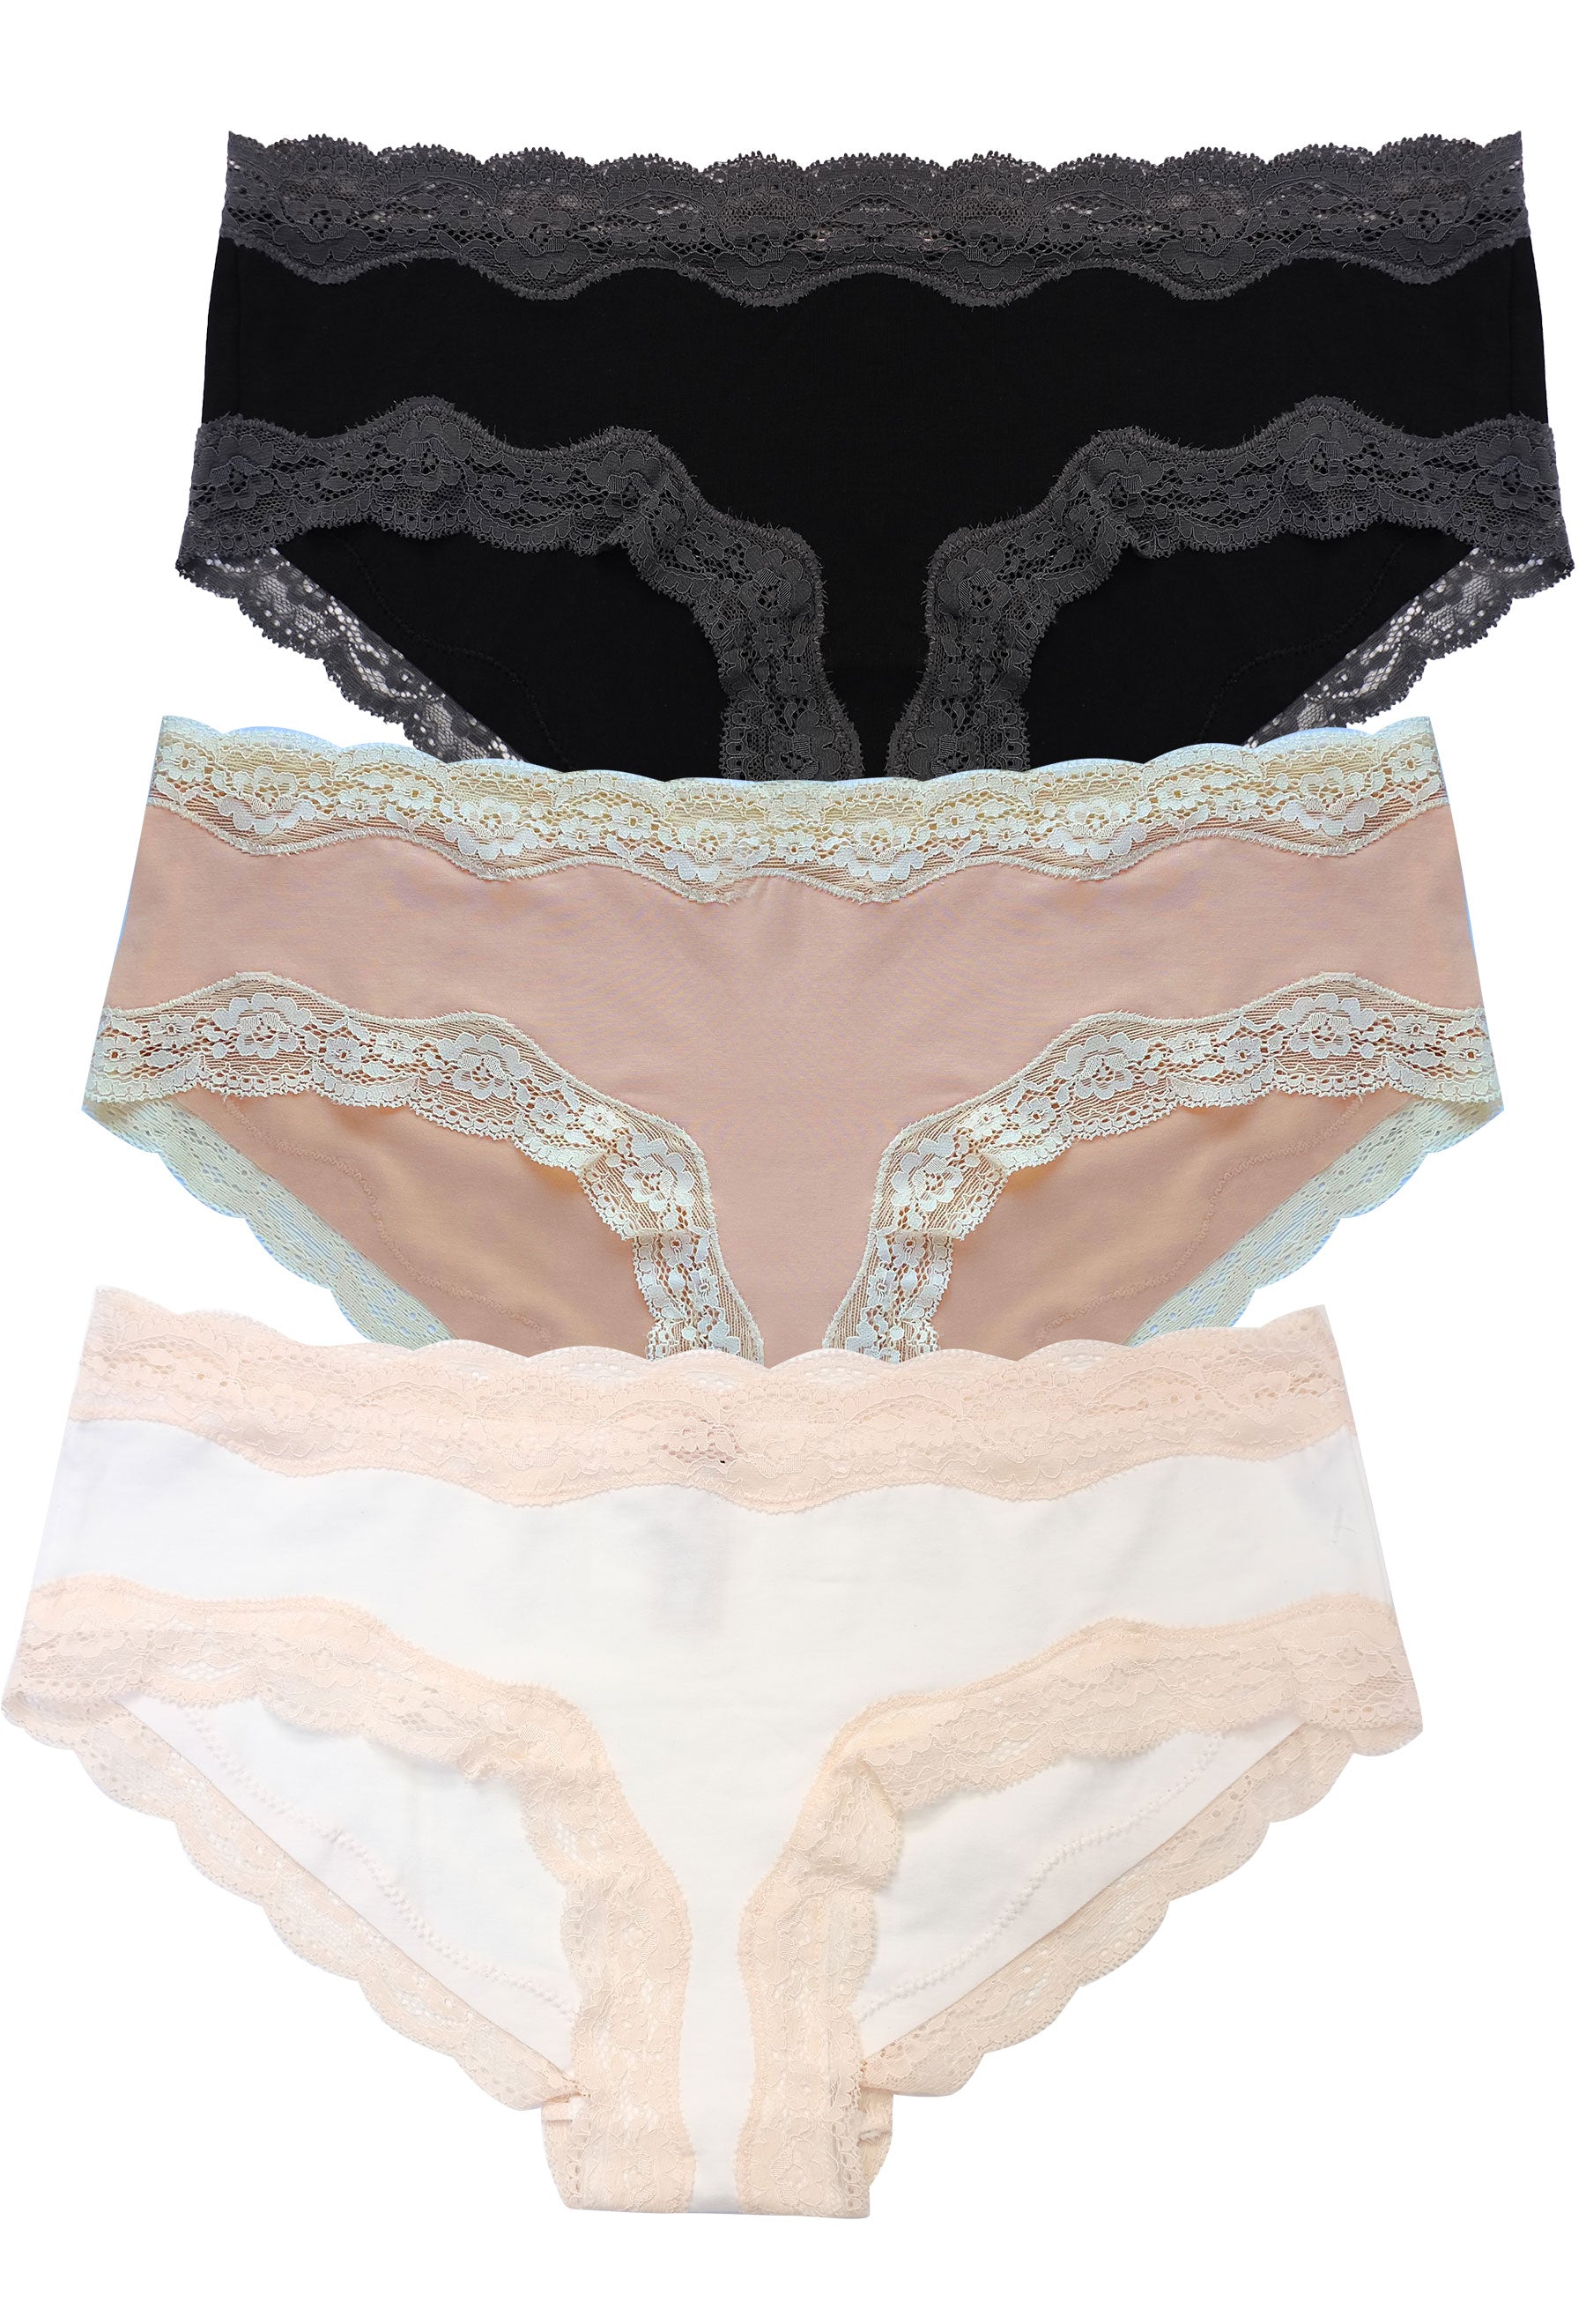 All-Over Lace Hipster Panties, R Line, Regular